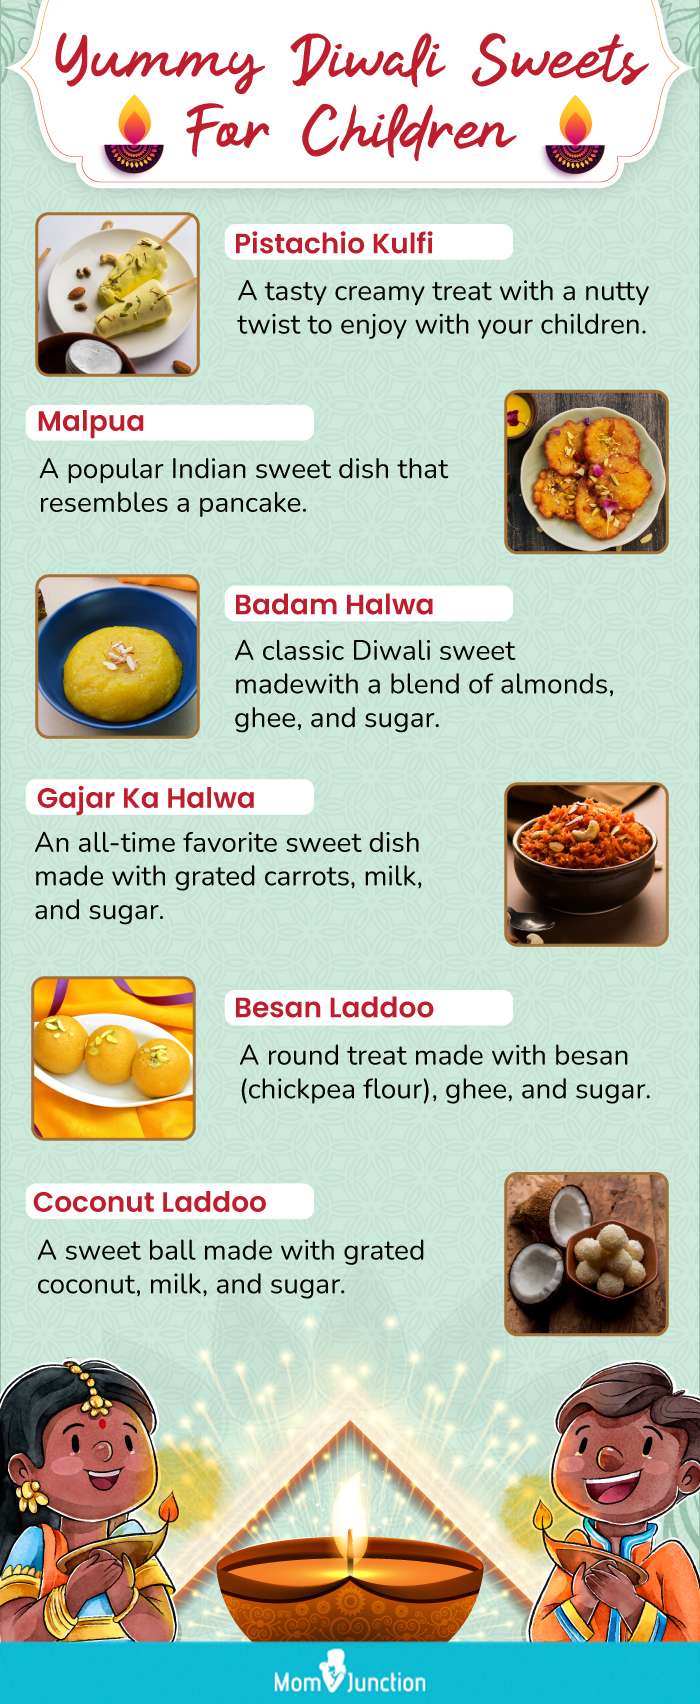 yummy diwali sweet recipes that your children will surely love (infographic)